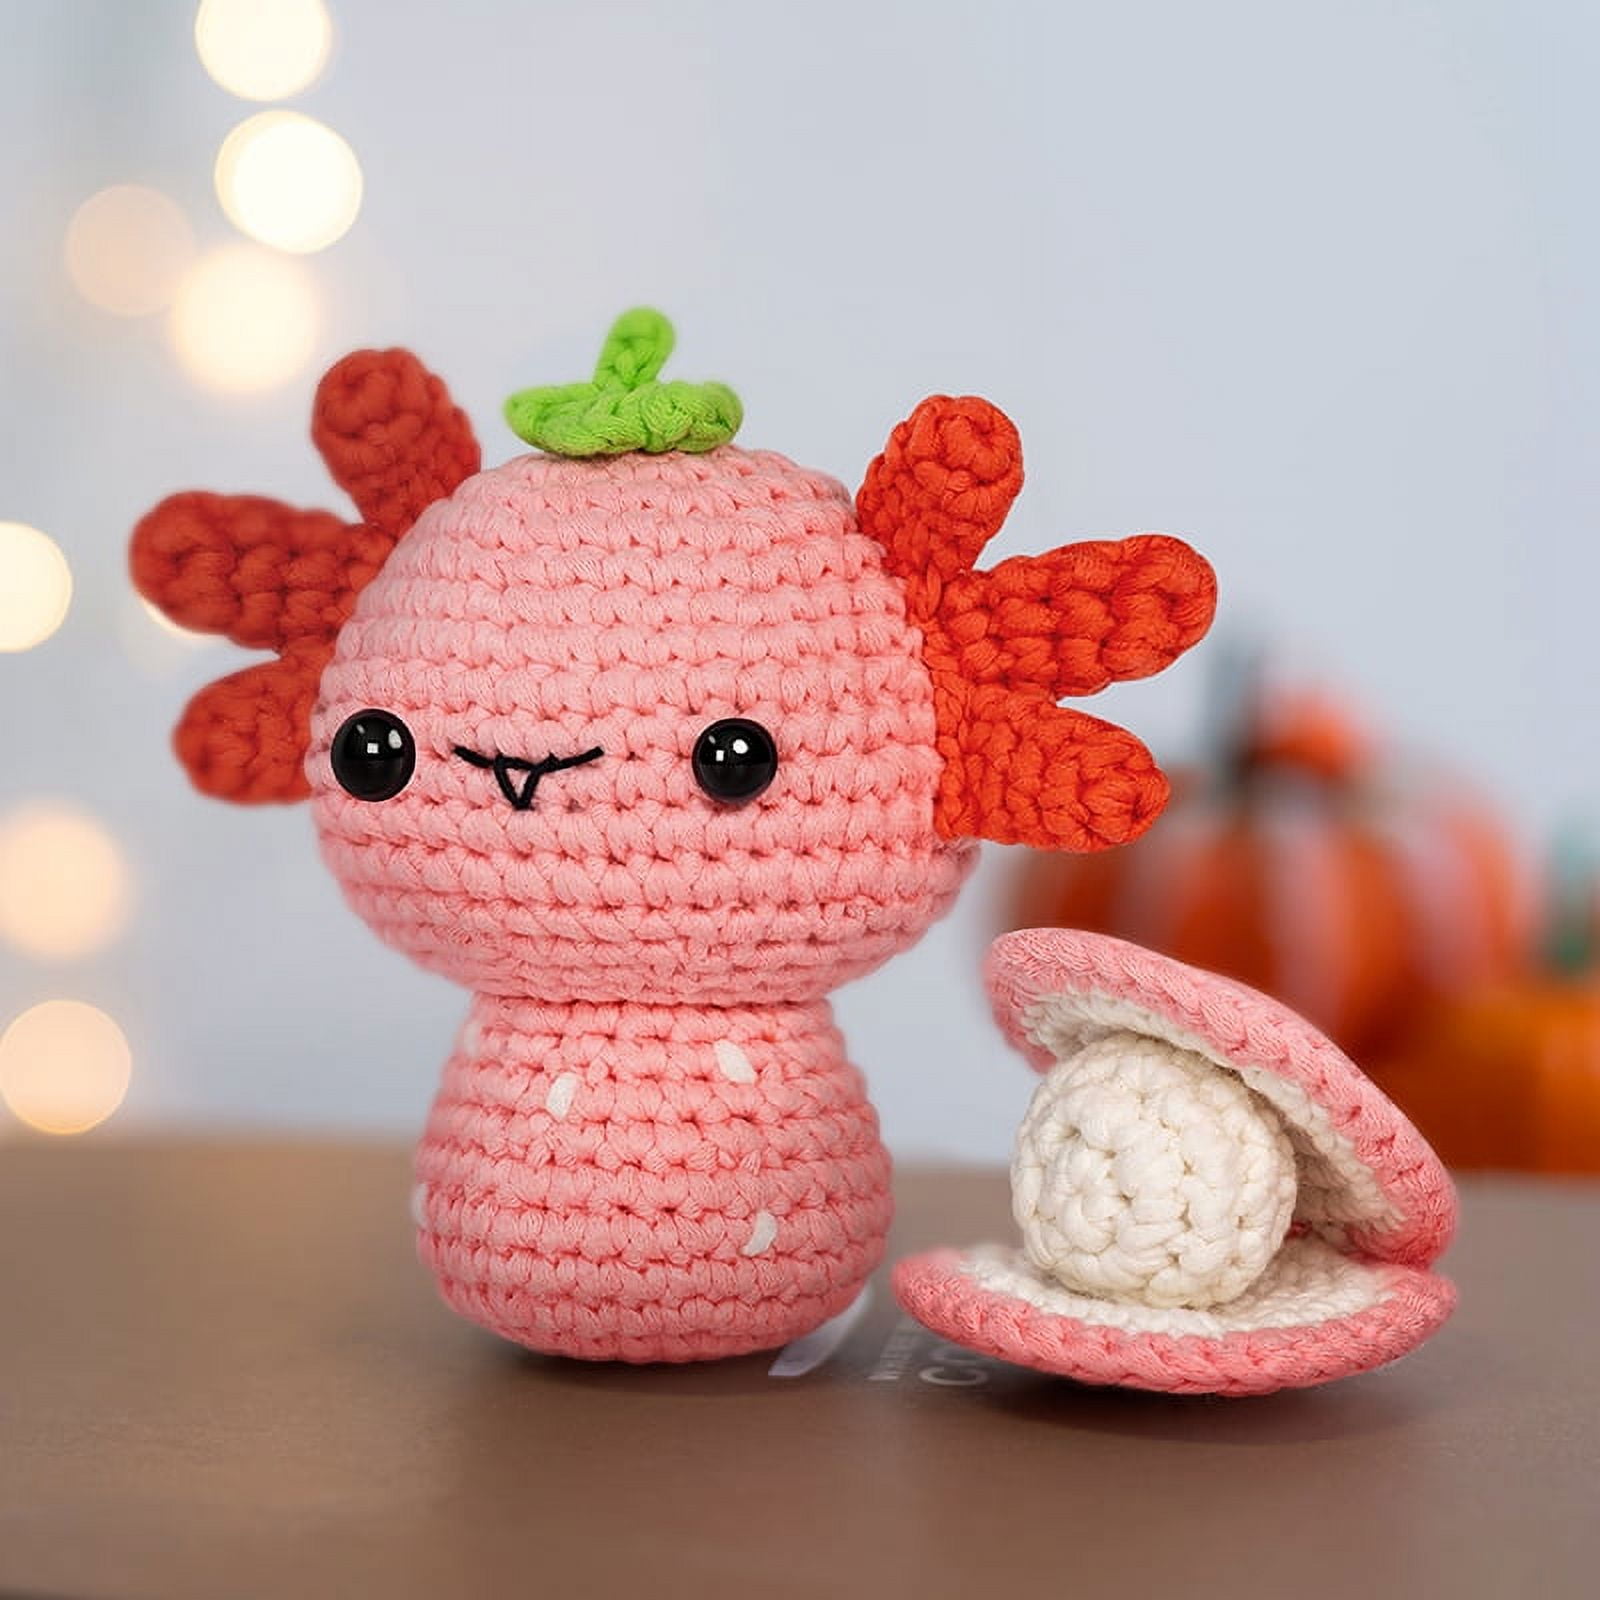  Mewaii Crochet Kit for Beginners with 4 Mushroom Plush,  Complete DIY Crochet Kit with 40%+ Pre-Started Tape Yarn Step-by-Step Video  Tutorials for Adults and Kids (Blueberry Cow with Sample Plush)